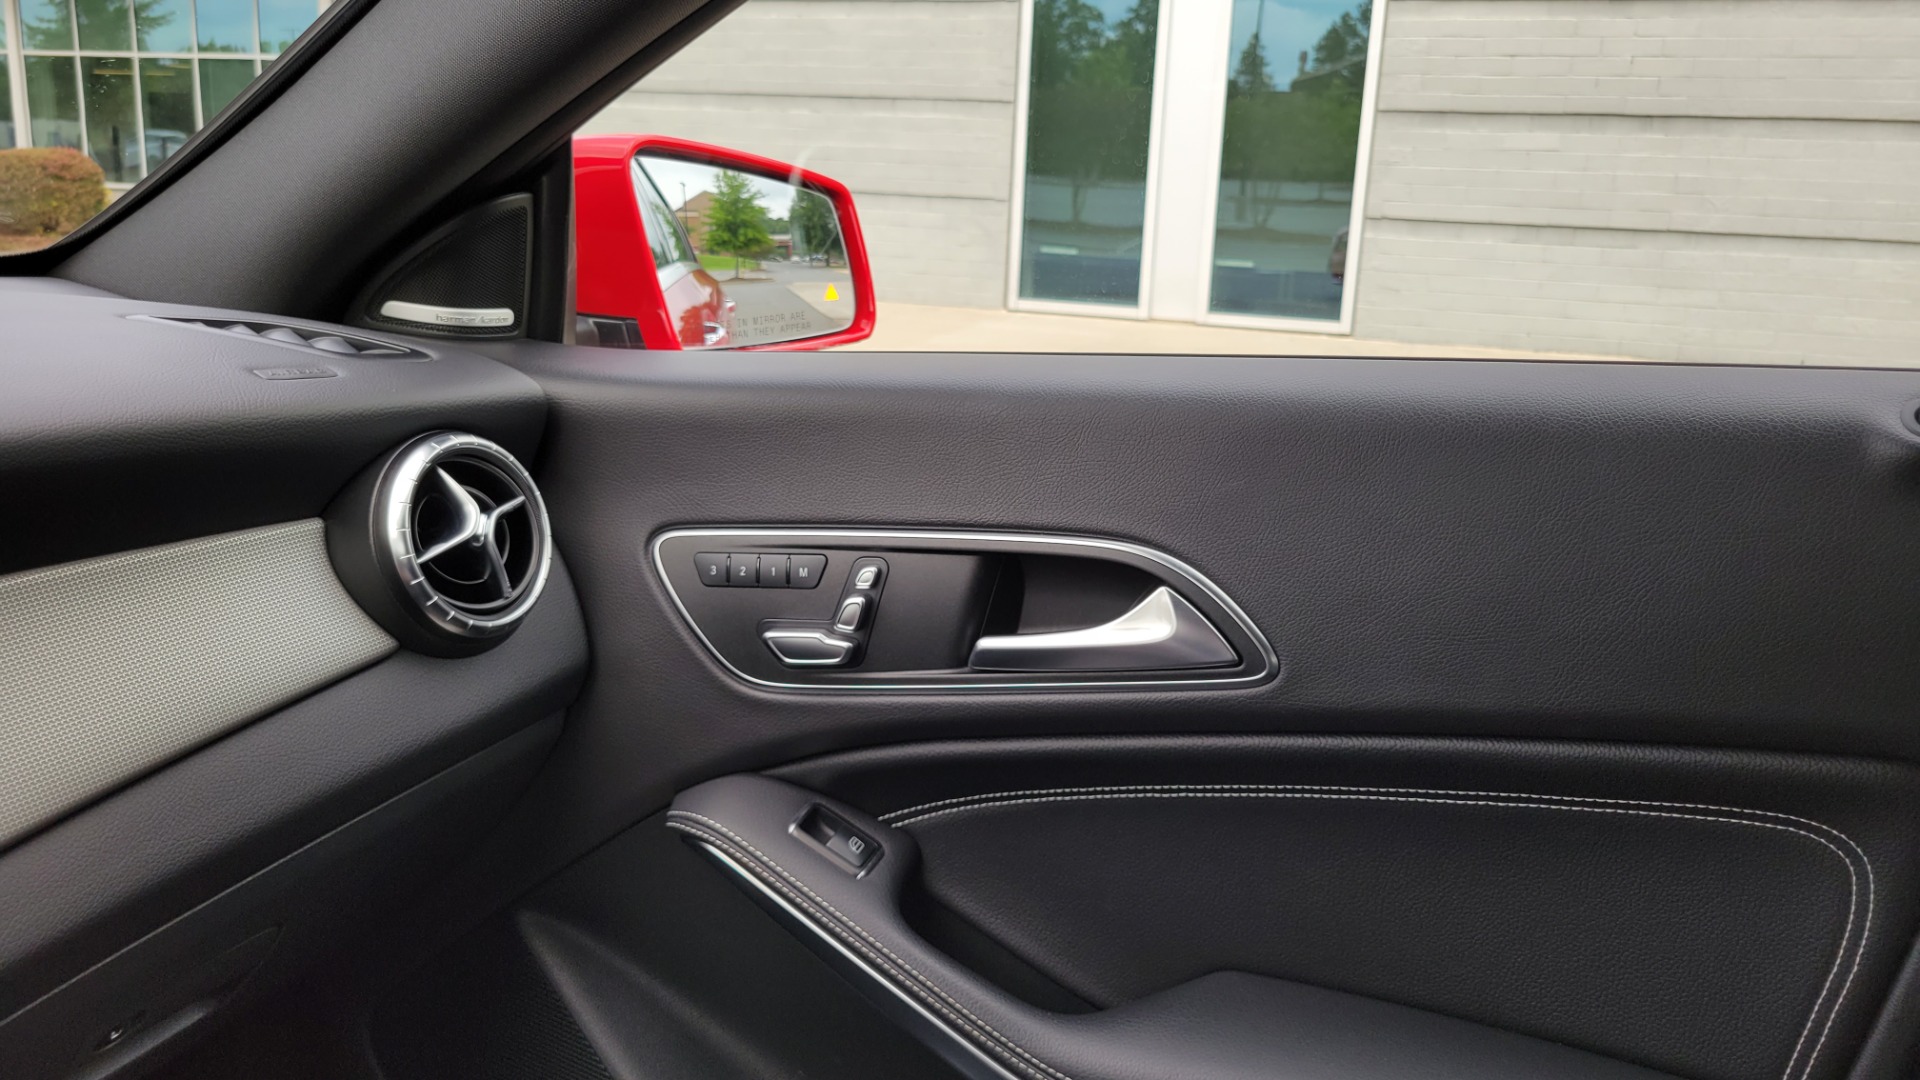 Used 2019 Mercedes-Benz CLA 250 PREMIUM / CONV PKG / PANO-ROOF / H/K SND / CAMERA for sale Sold at Formula Imports in Charlotte NC 28227 93